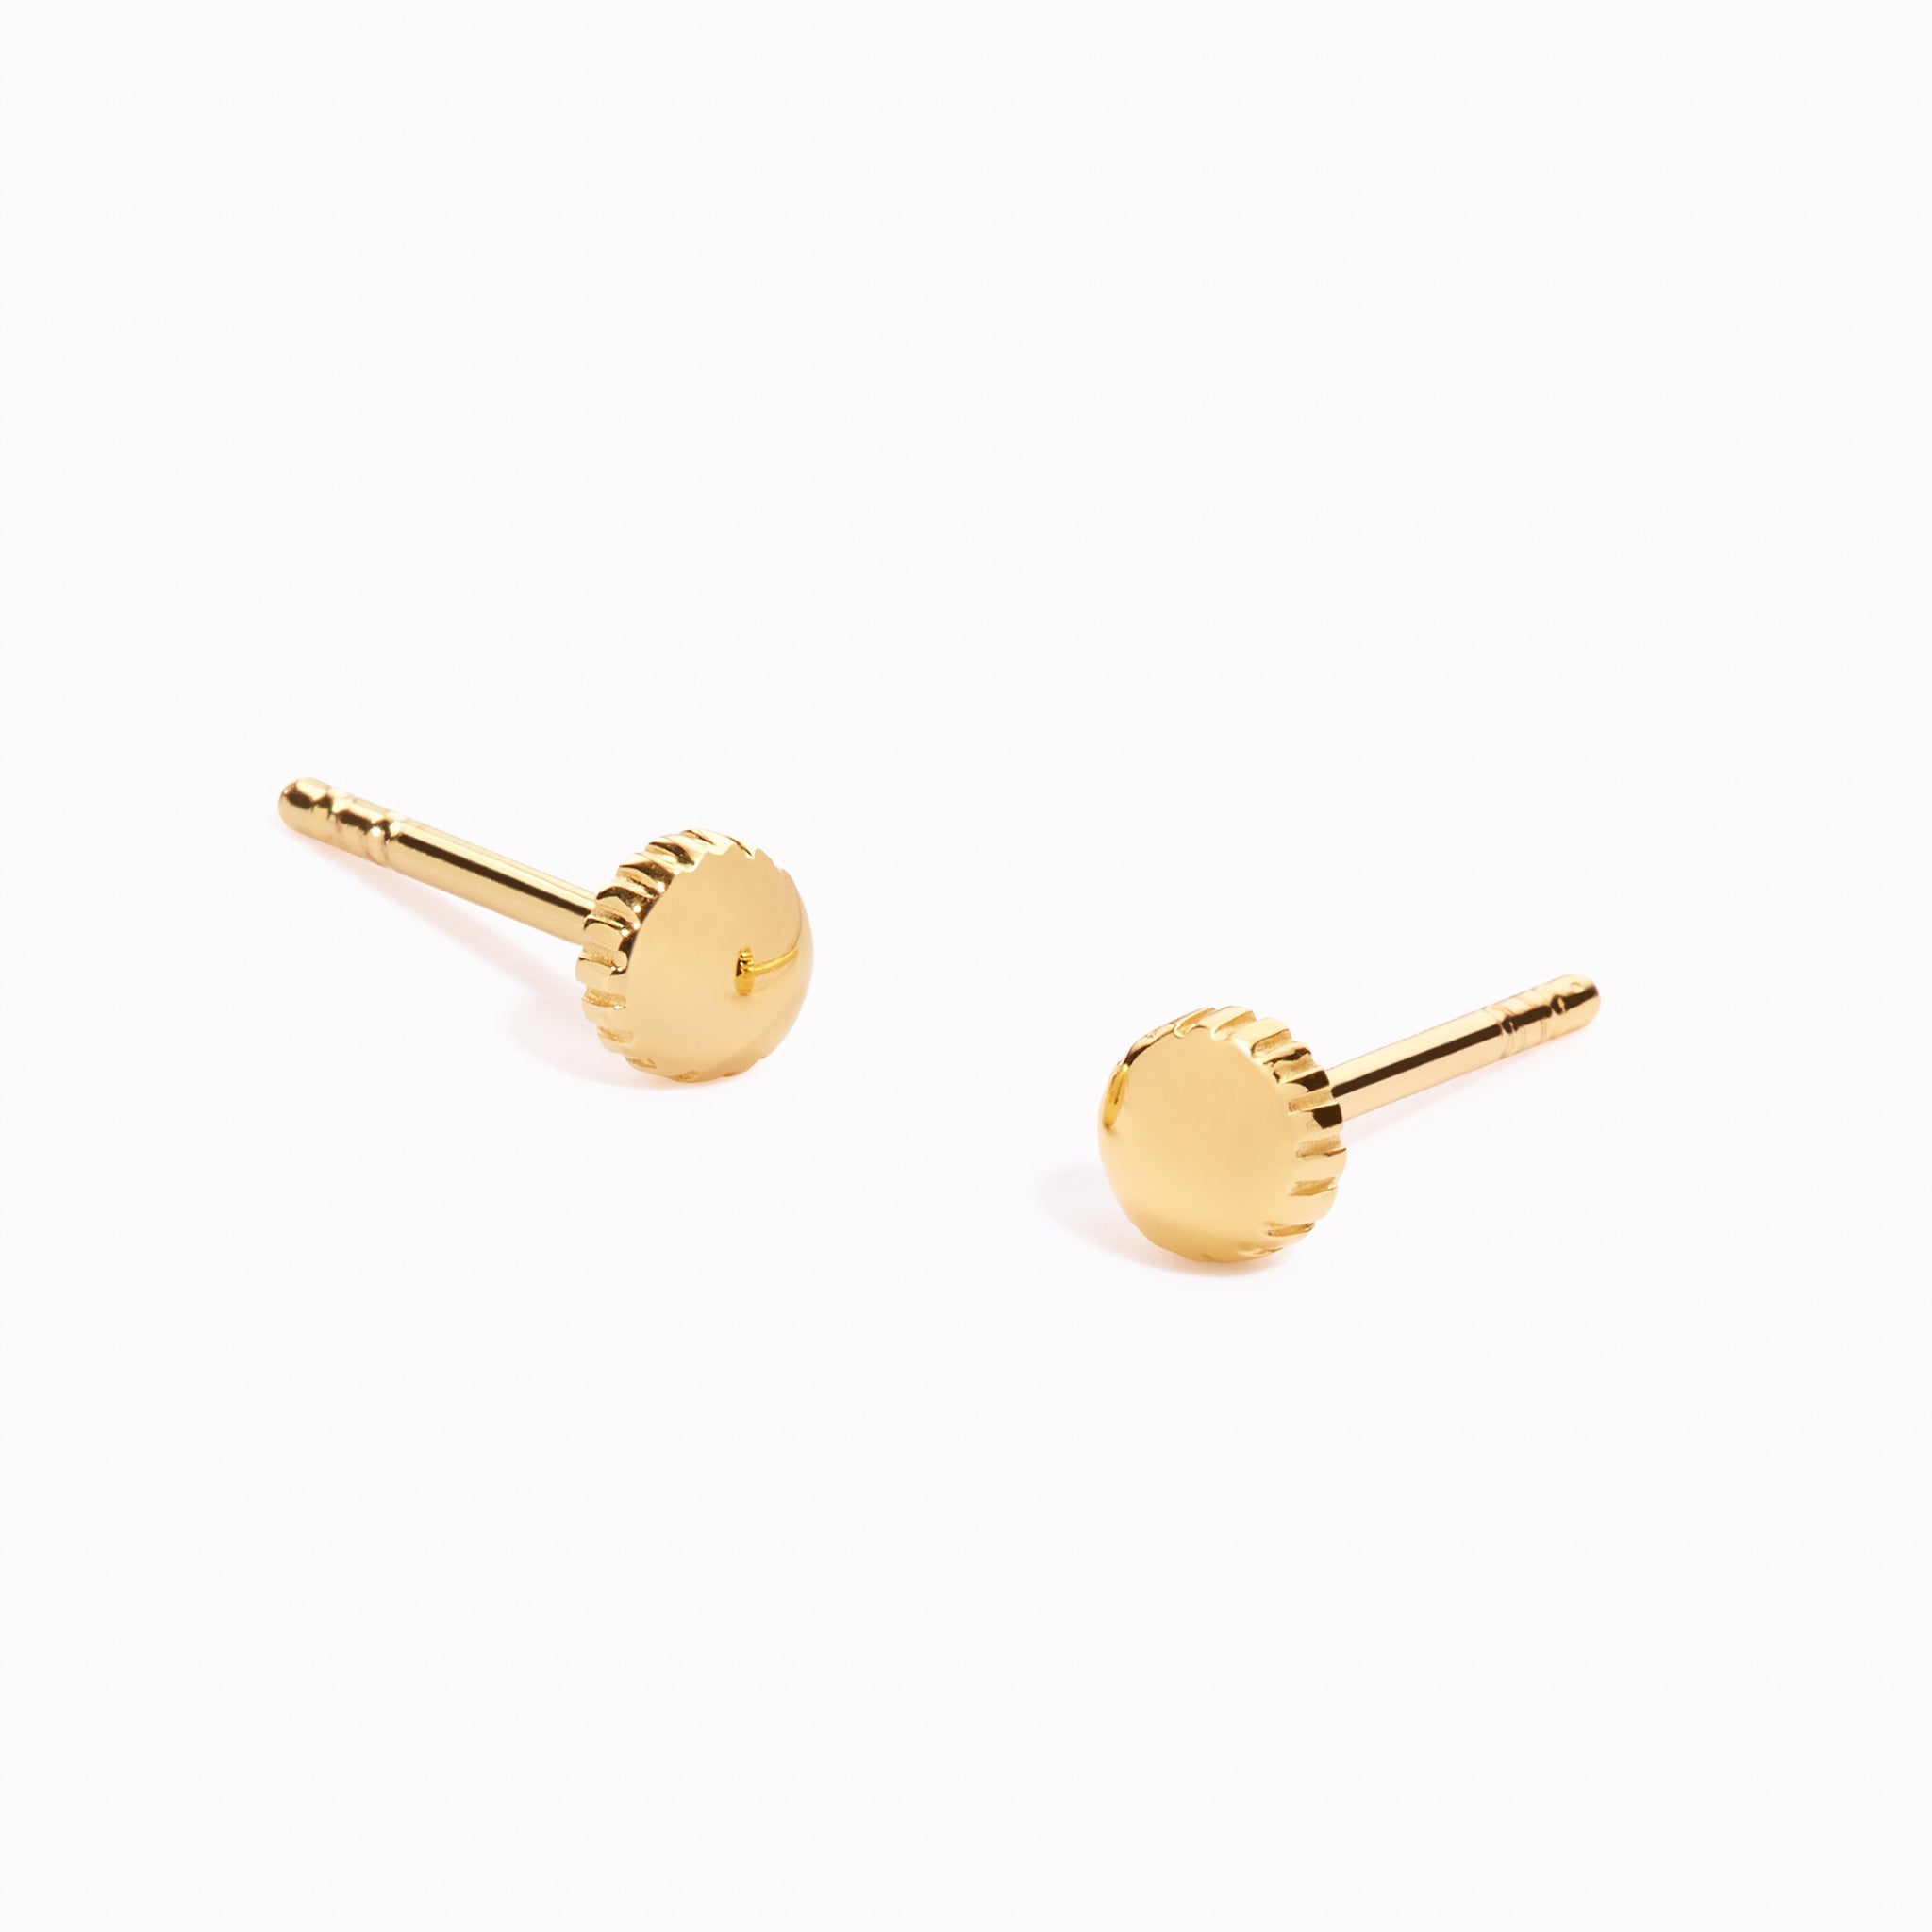 Solid 14k Yellow Gold Ball Stud Earrings - Simple Minimalist Stud Earrings  - Stacking Earrings - Eco Friendly Studs - Ready to Ship